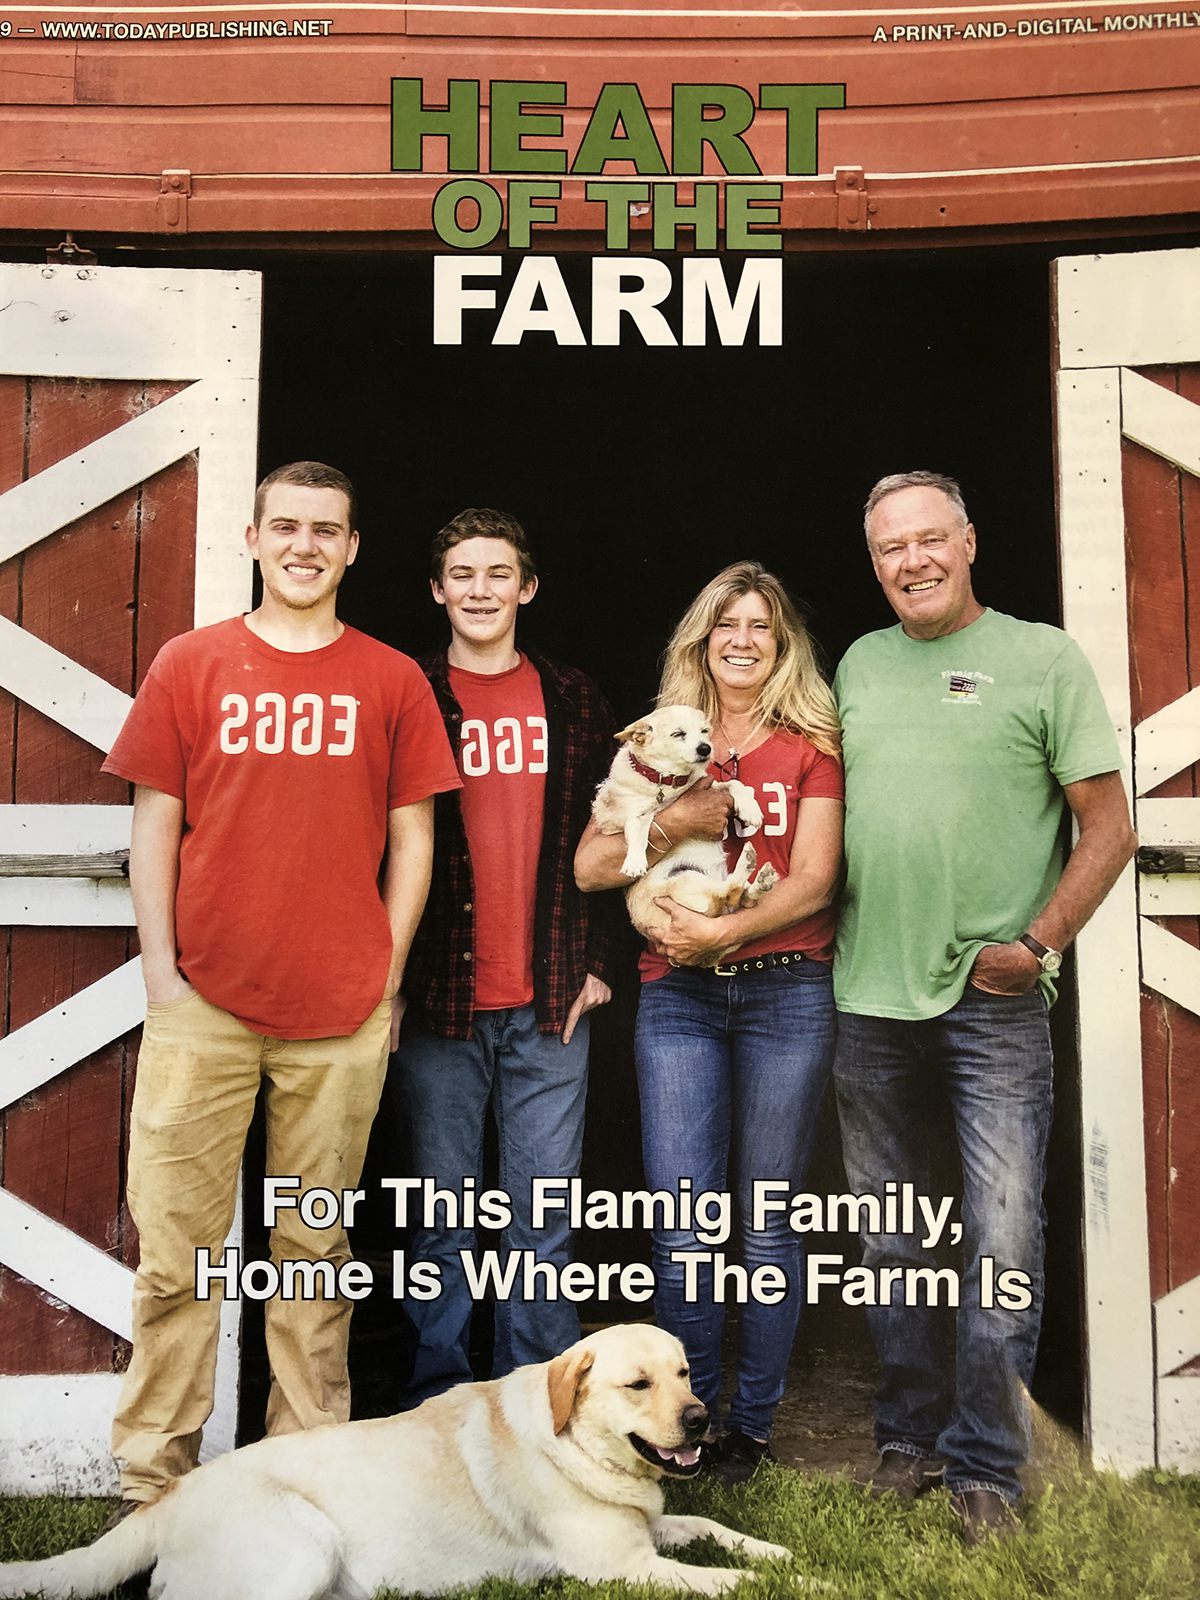 The Christensen Family at Flamig Farm in Simsbury, CT